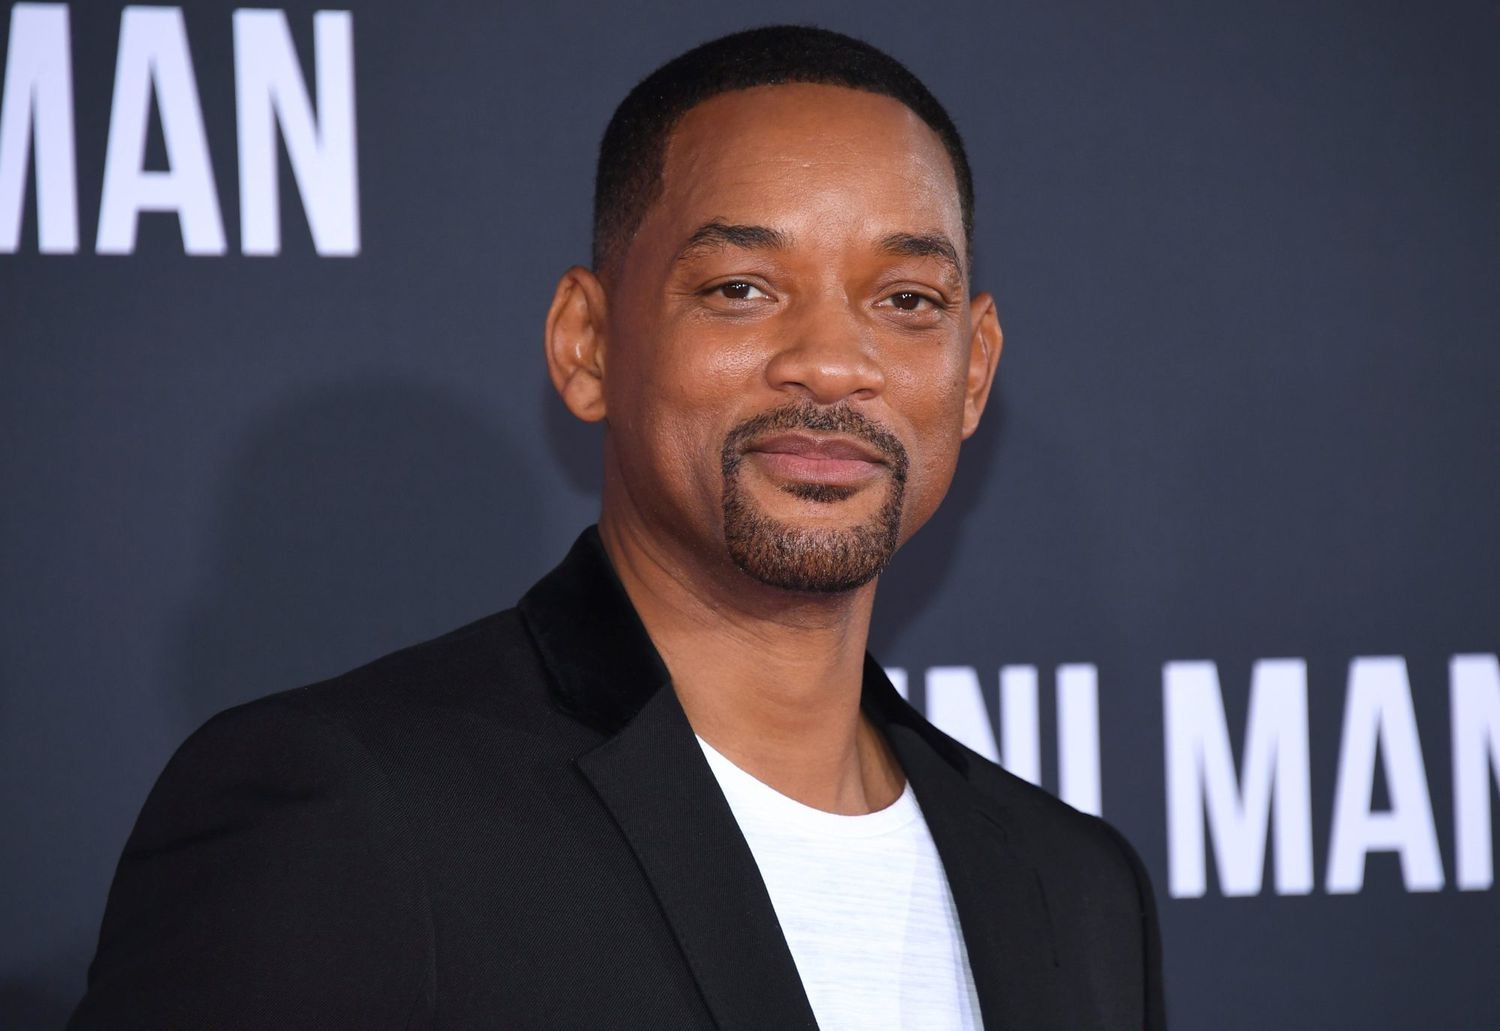 Will Smith at an event